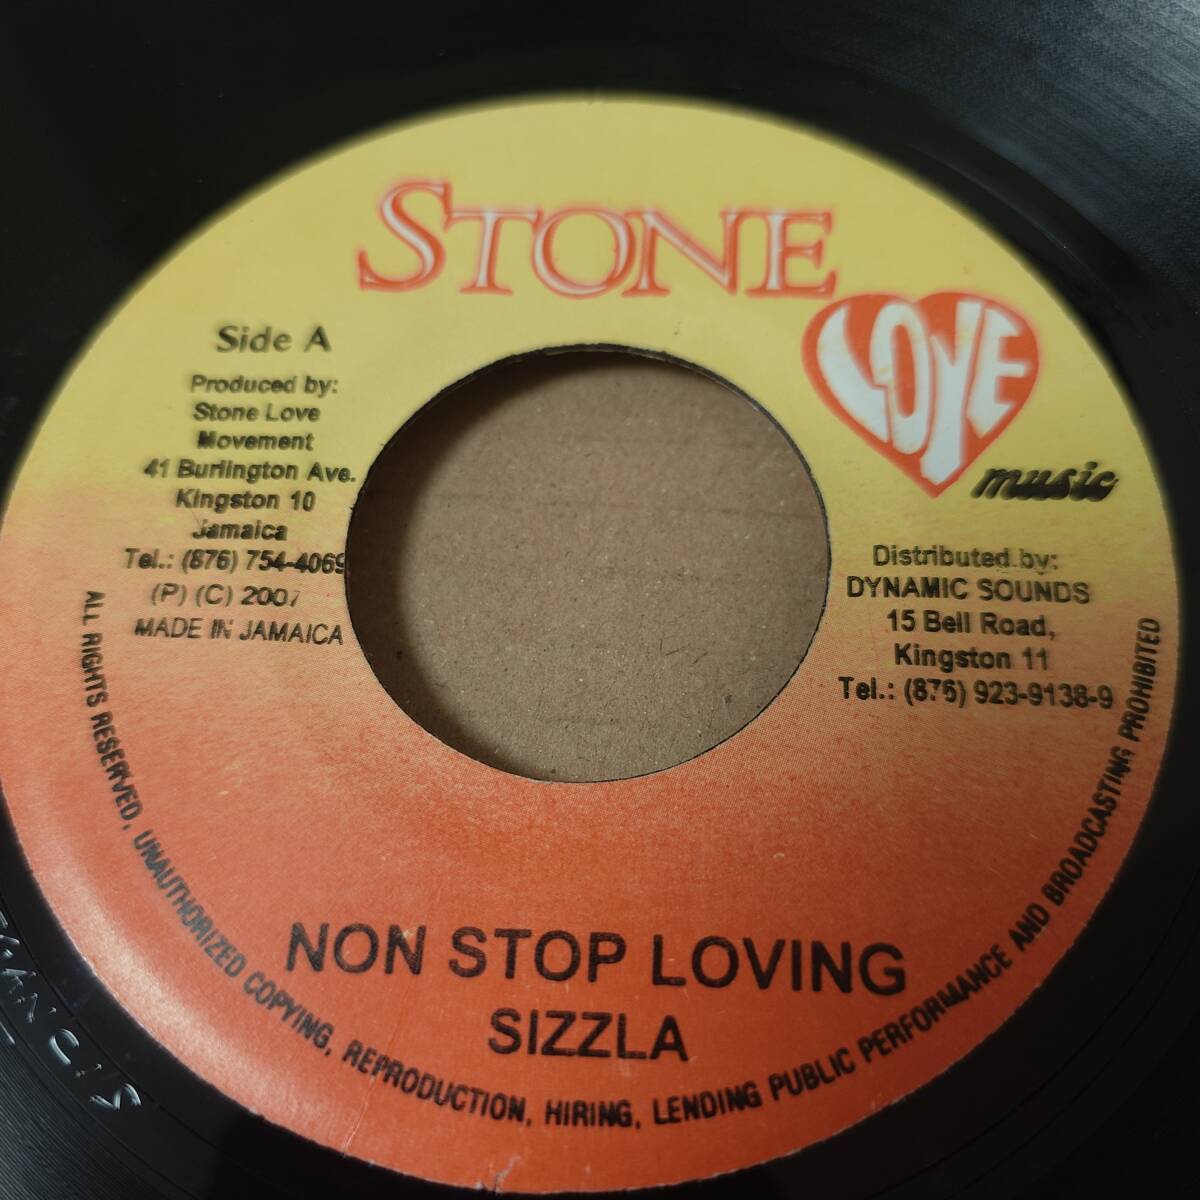 Sizzla - Non Stop Loving / Ghost - Reach Out // Stone Love 7inch / Bitty McLean / Alton Ellis / AA1942